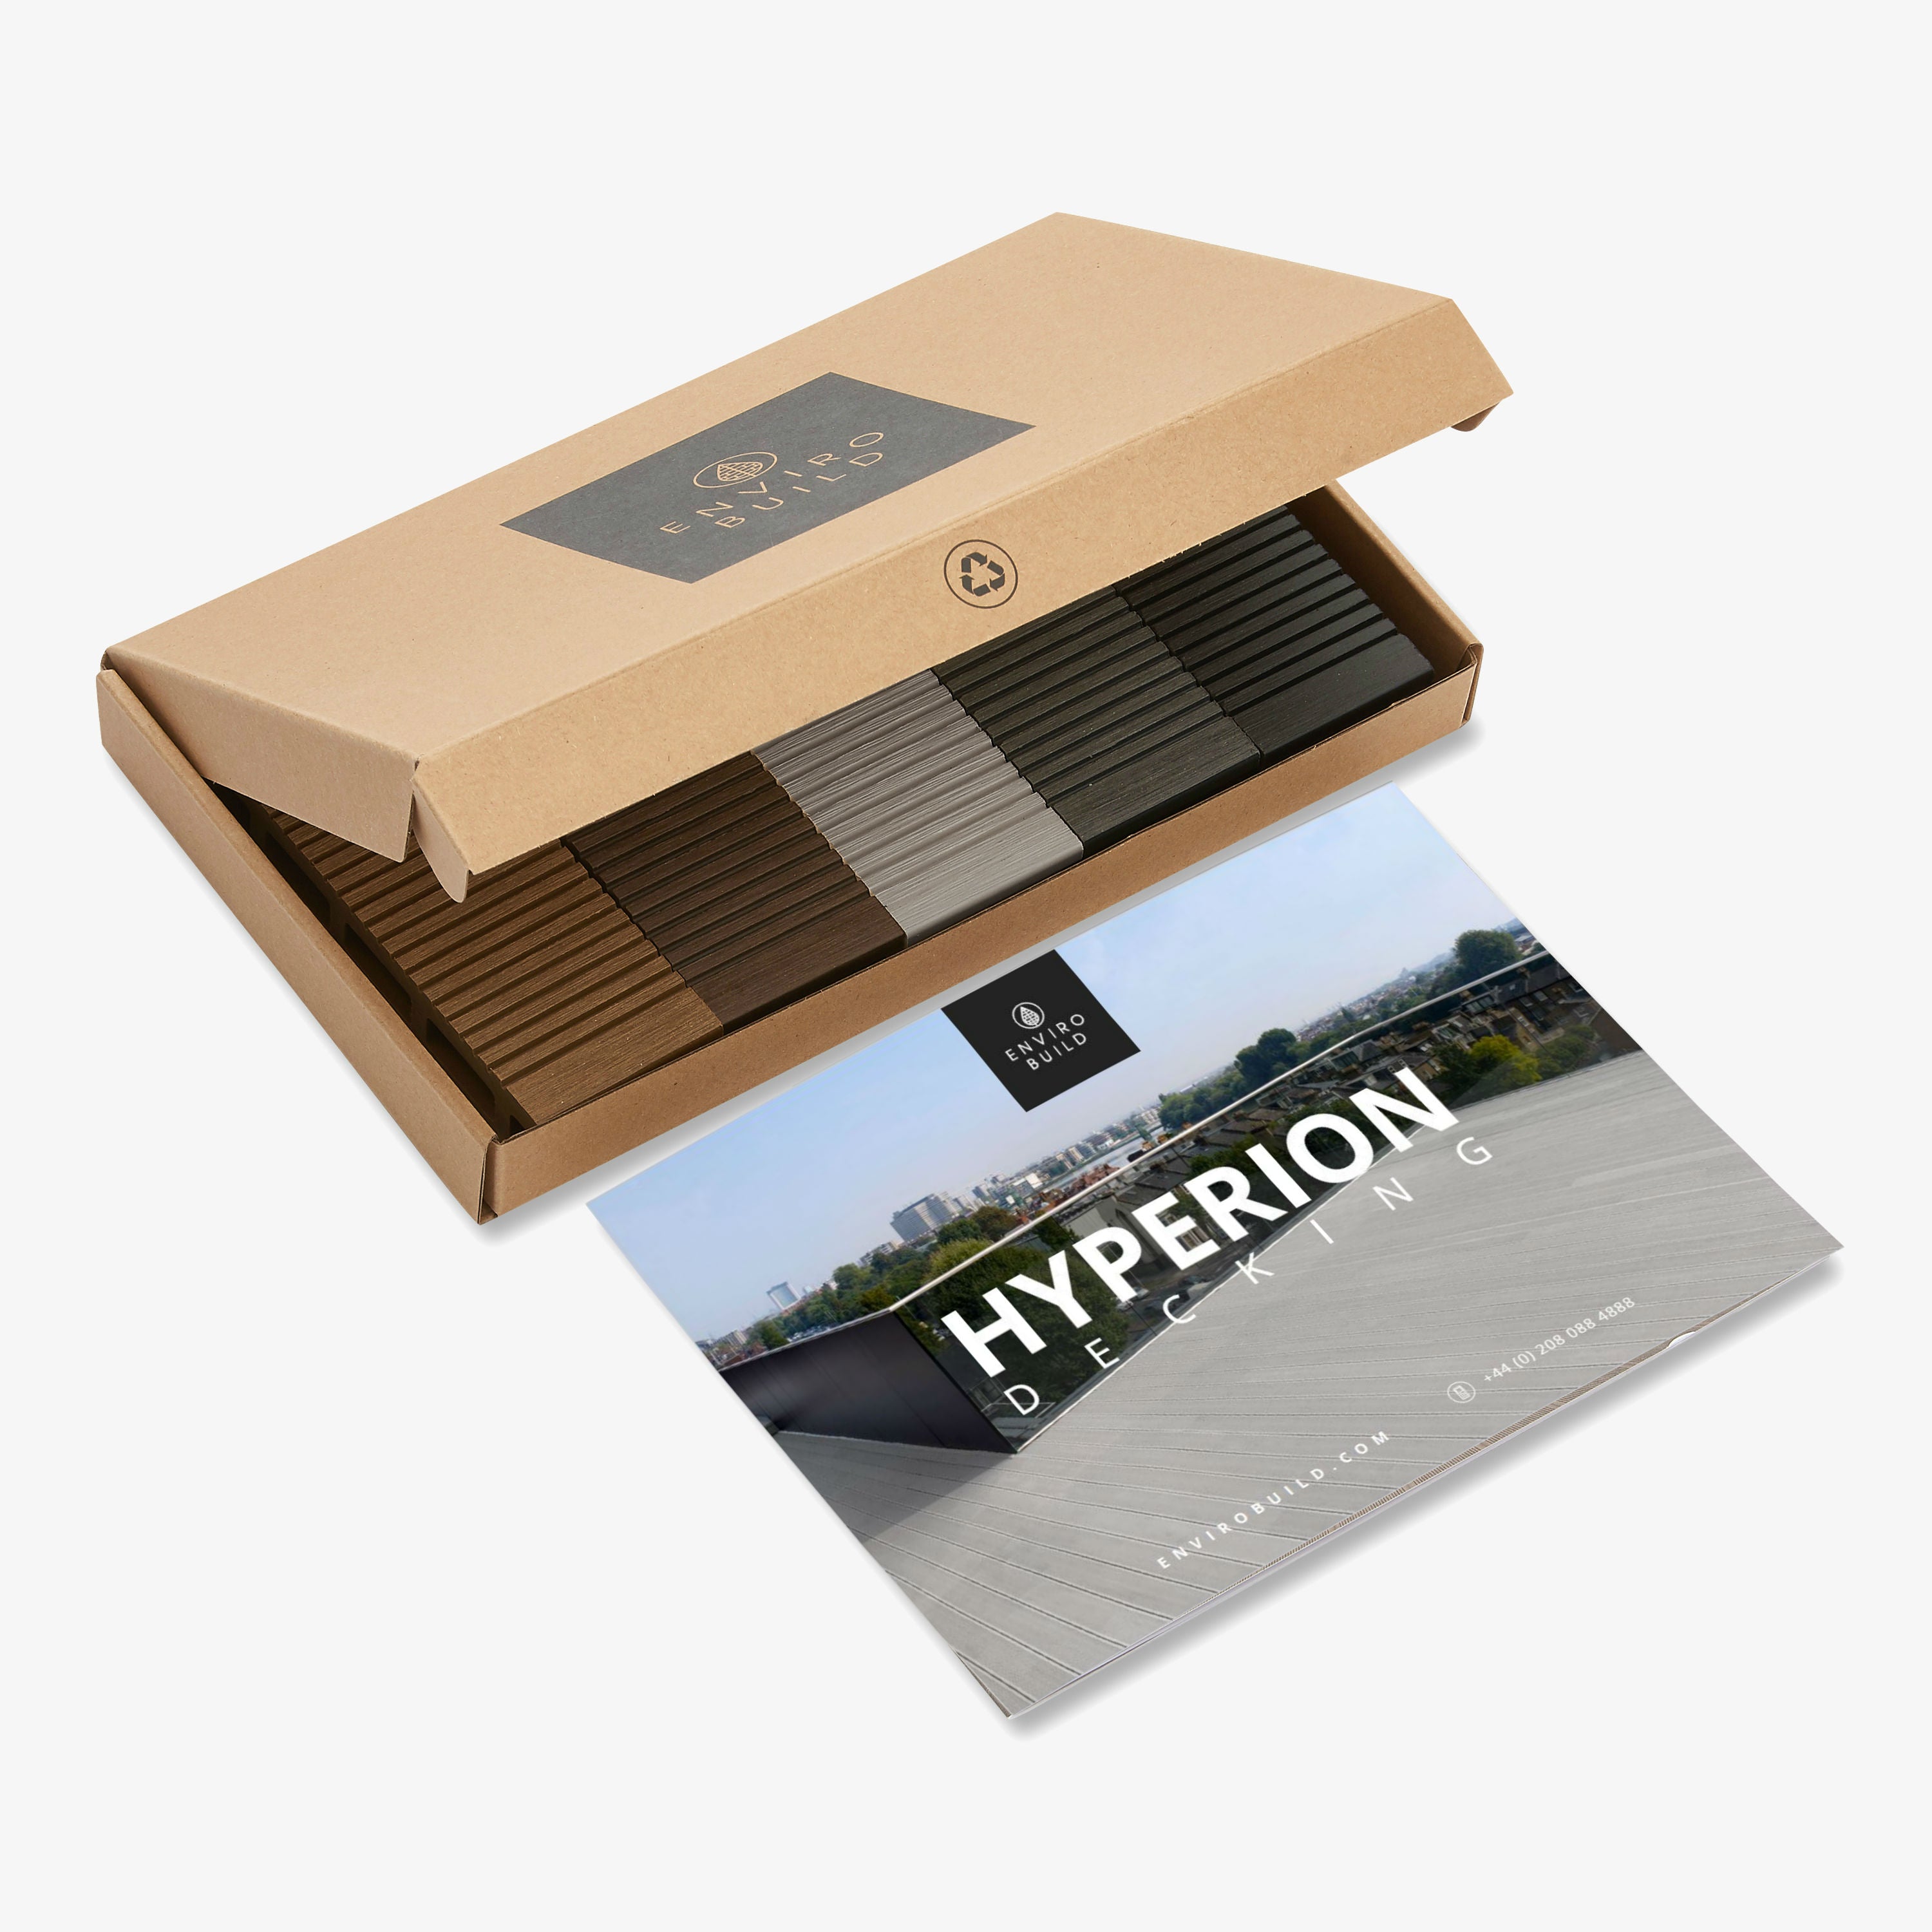 Composite Decking Samples , HYPERION - All Colours